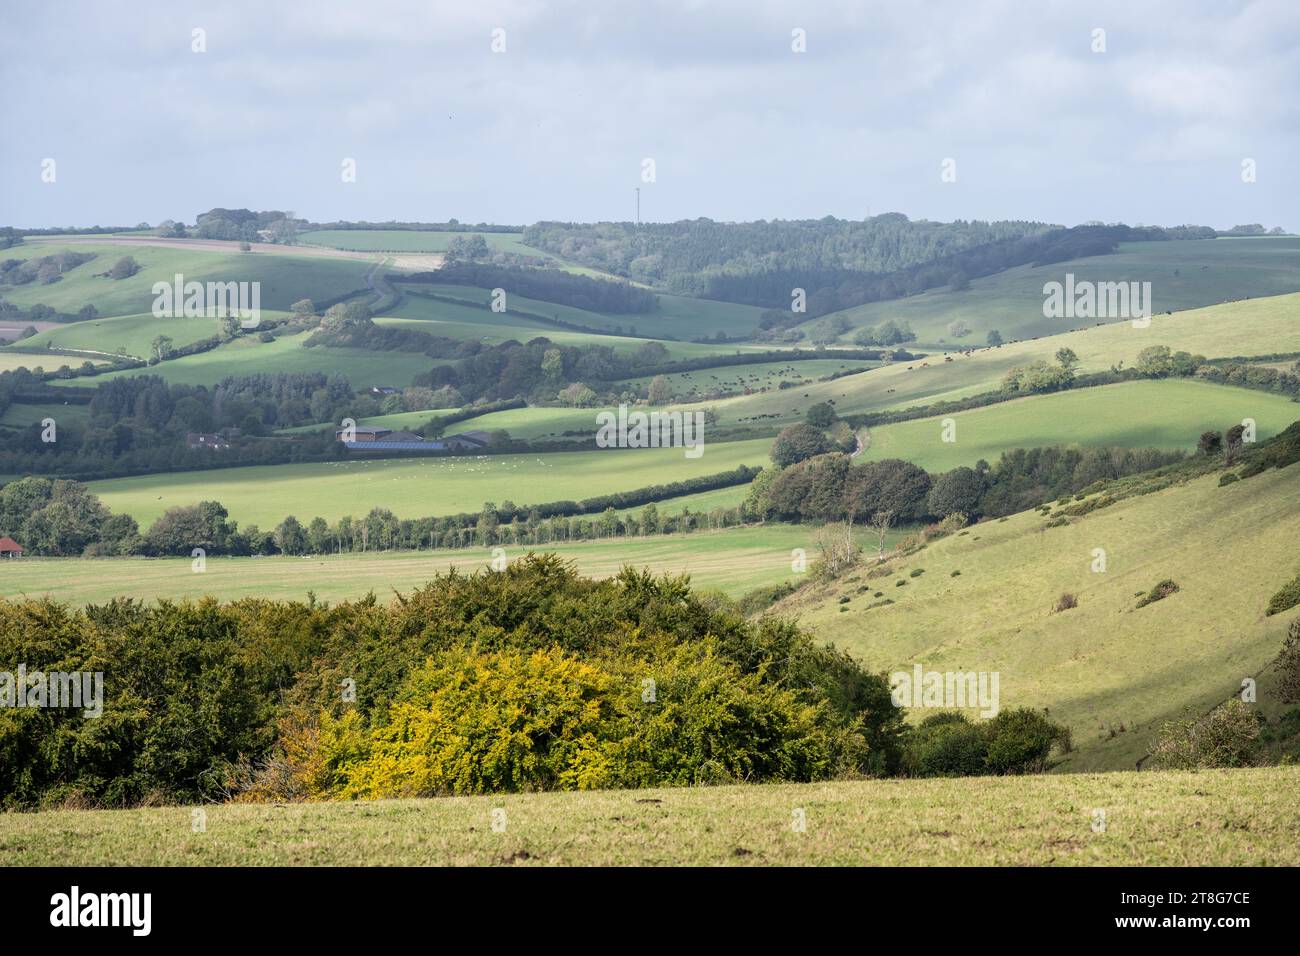 Farmland fields and patchwork woodland fills the Sydling Valley in the rolling hills of England's Dorset Downs. Stock Photo